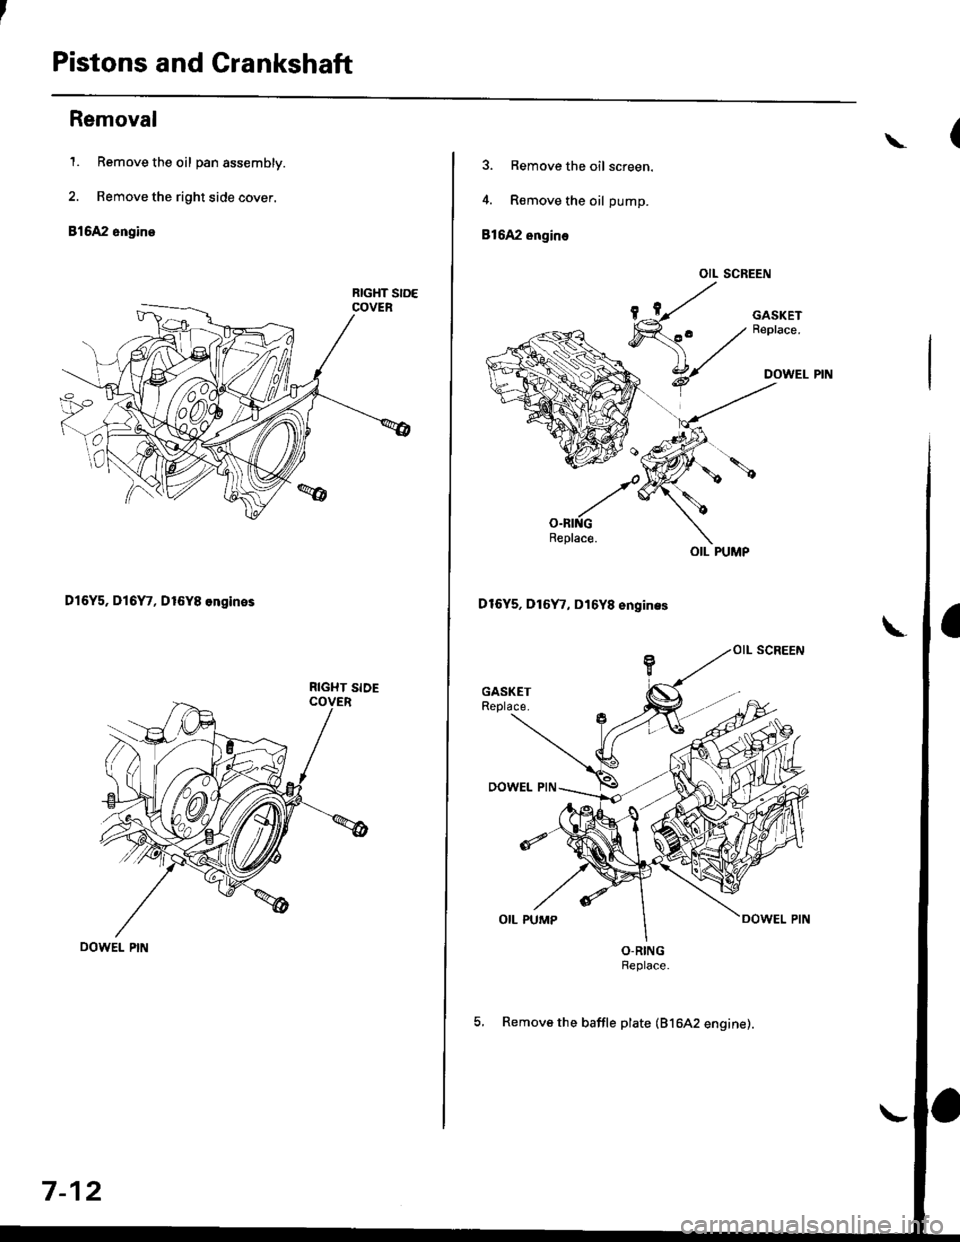 HONDA CIVIC 1998 6.G User Guide Pistons and Crankshaft
Removal
1. Remove the oil pan assembly.
2. Remove the right side cover.
816A2 engine
D16Y5, Dl6Y7, D16Y8 ongines
RIGHT SIDE
7-12
\
3. Remove the oil screen.
4. R€move the oil 